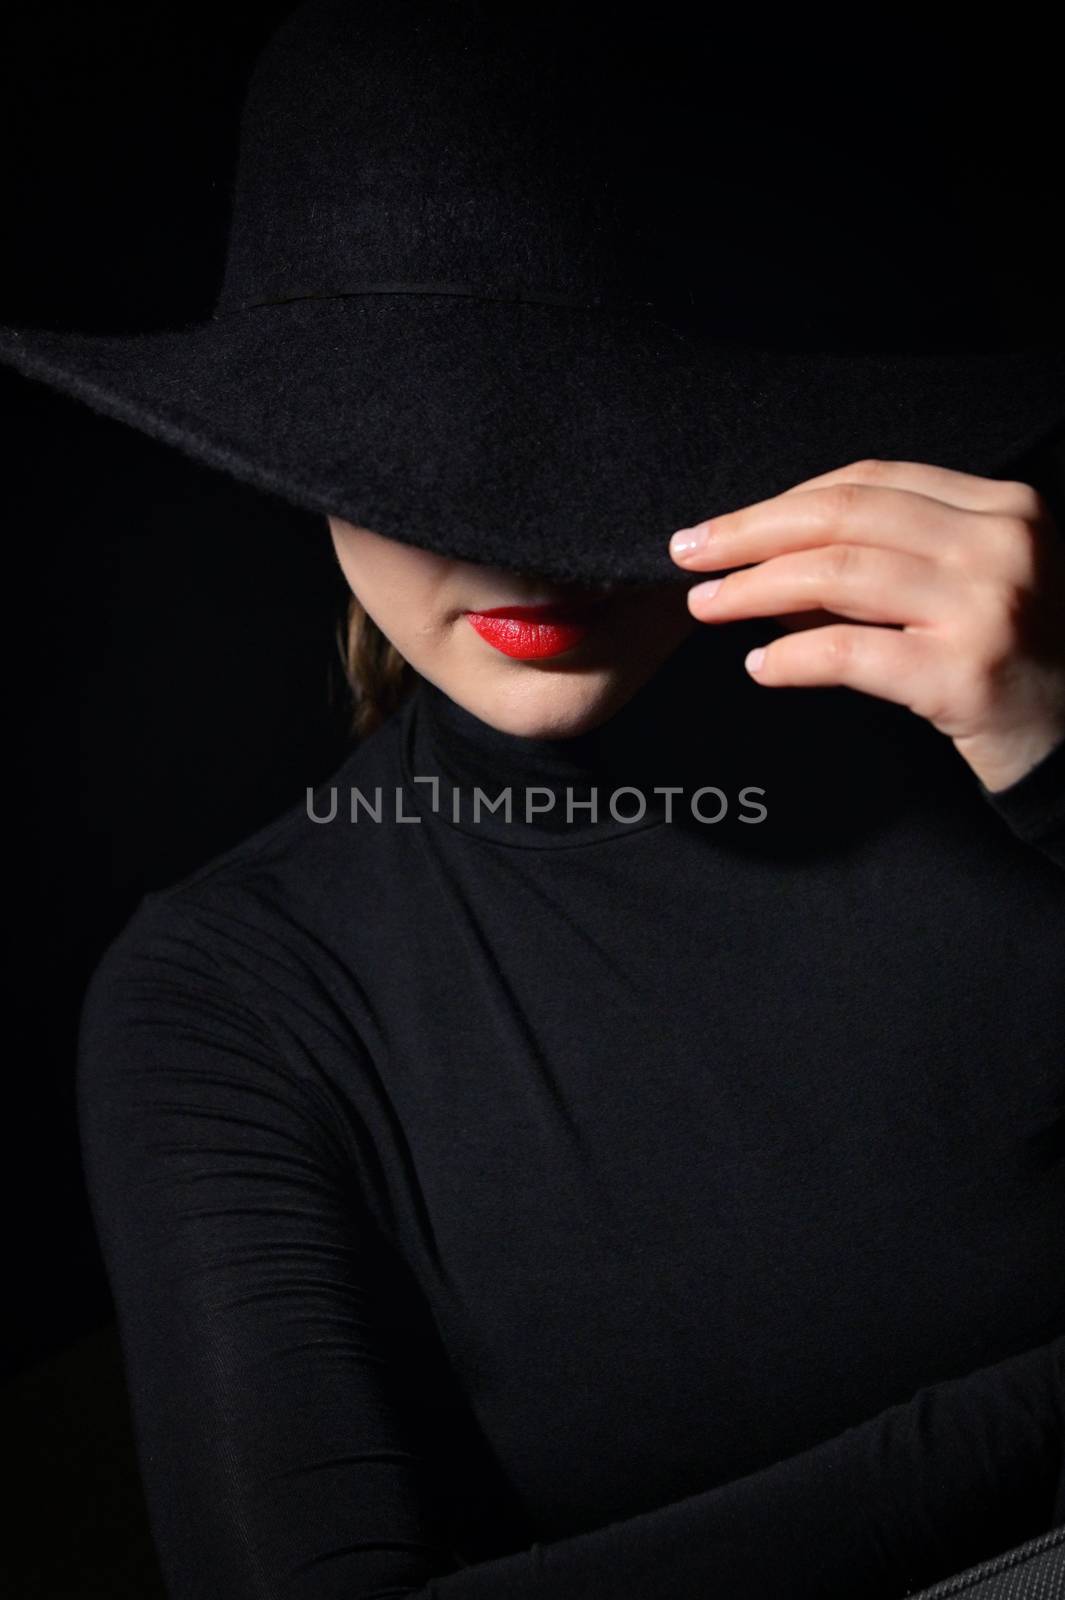 A Woman With Red Lips In A Black Hat by mady70